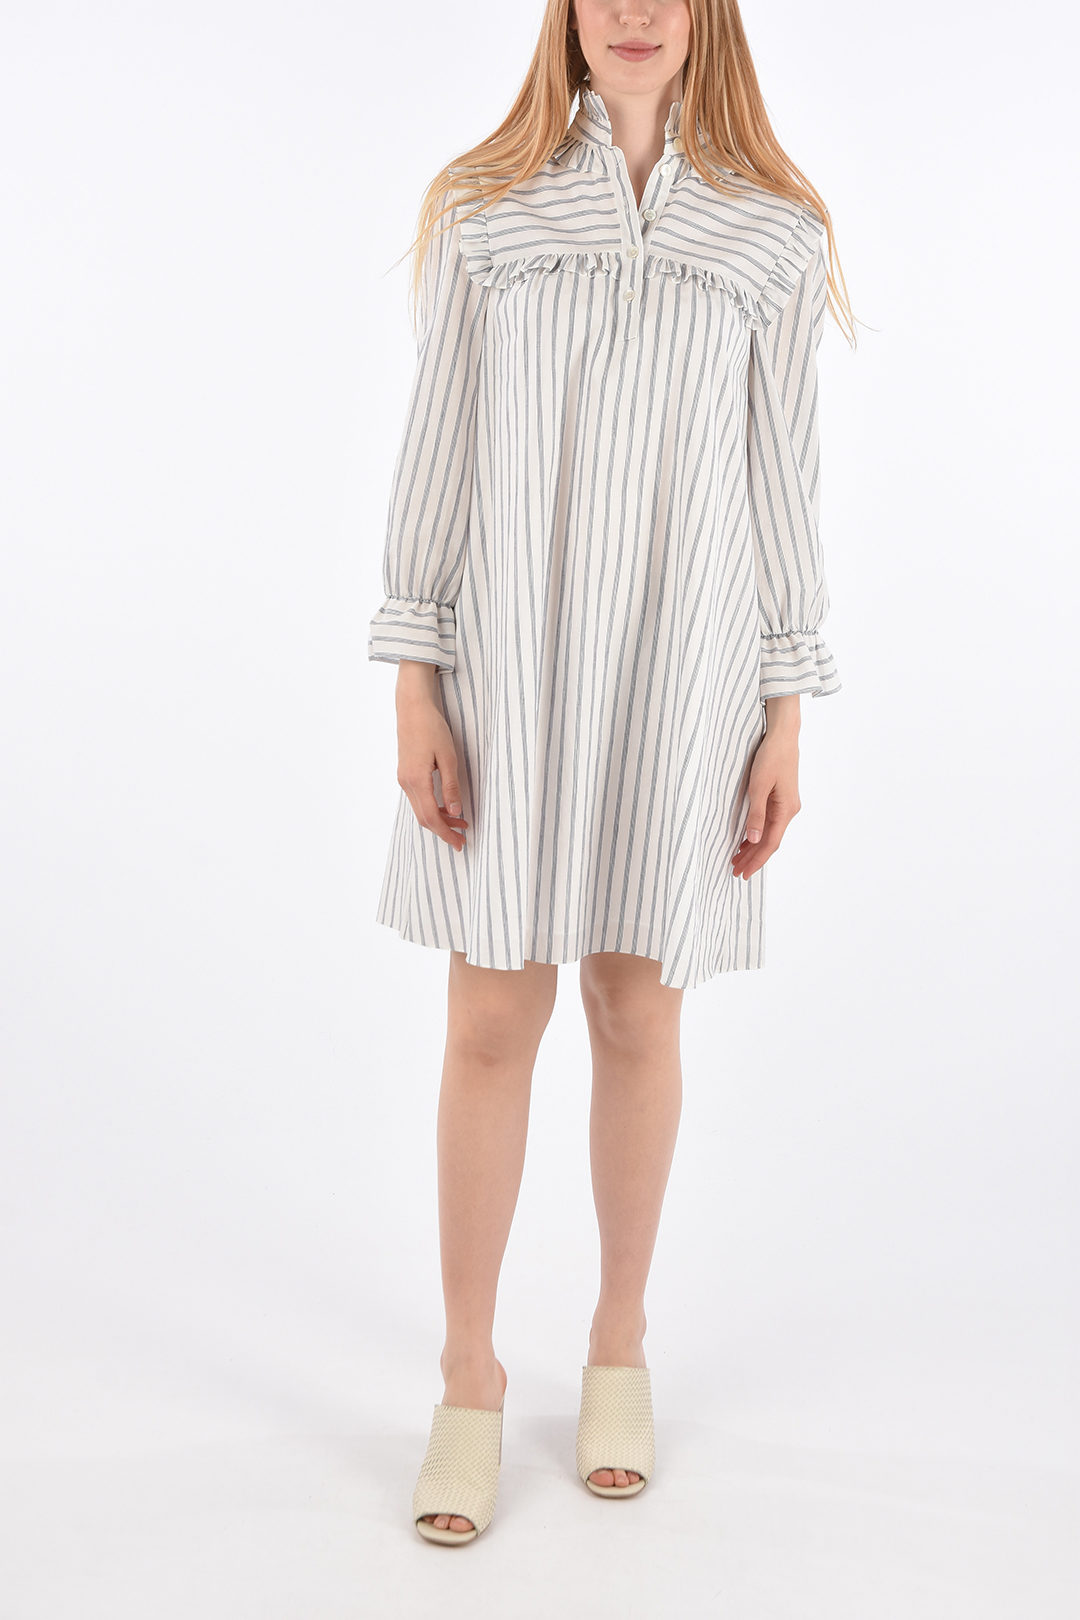 Celine Striped Shirt Dress with Ruffles women - Glamood Outlet